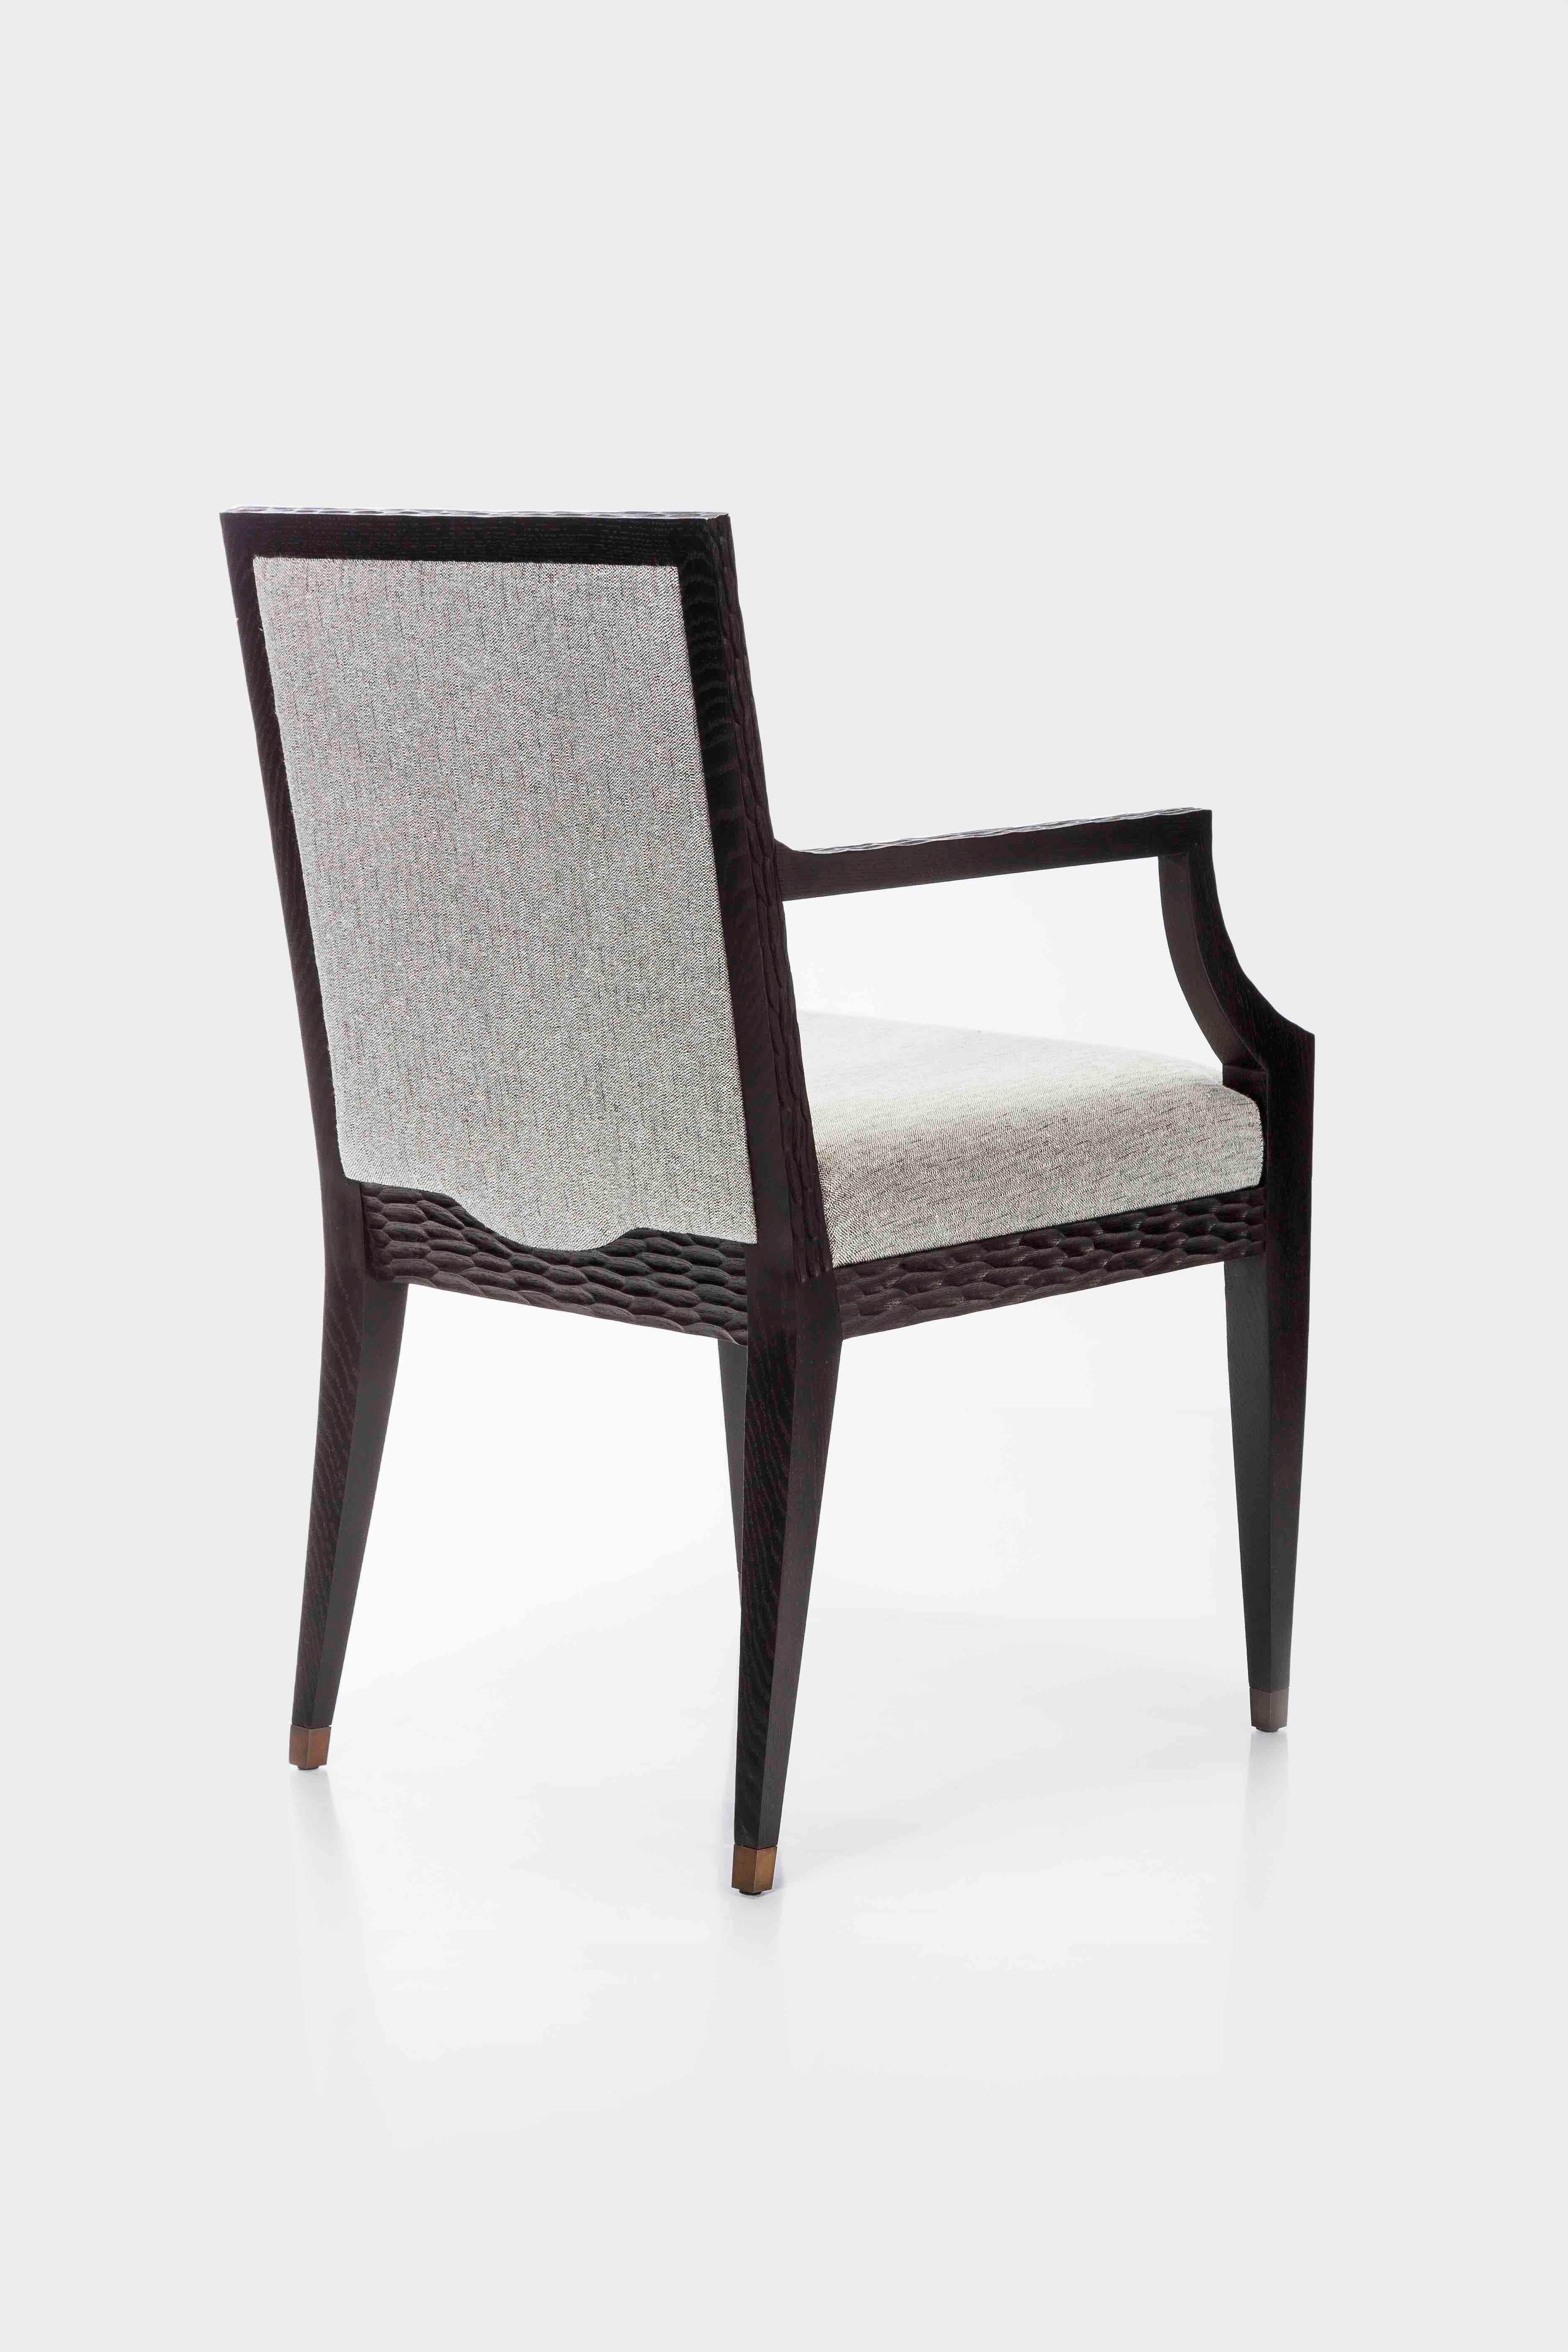 Miti armchair by Francis Sultana (all prices exclude delivery)